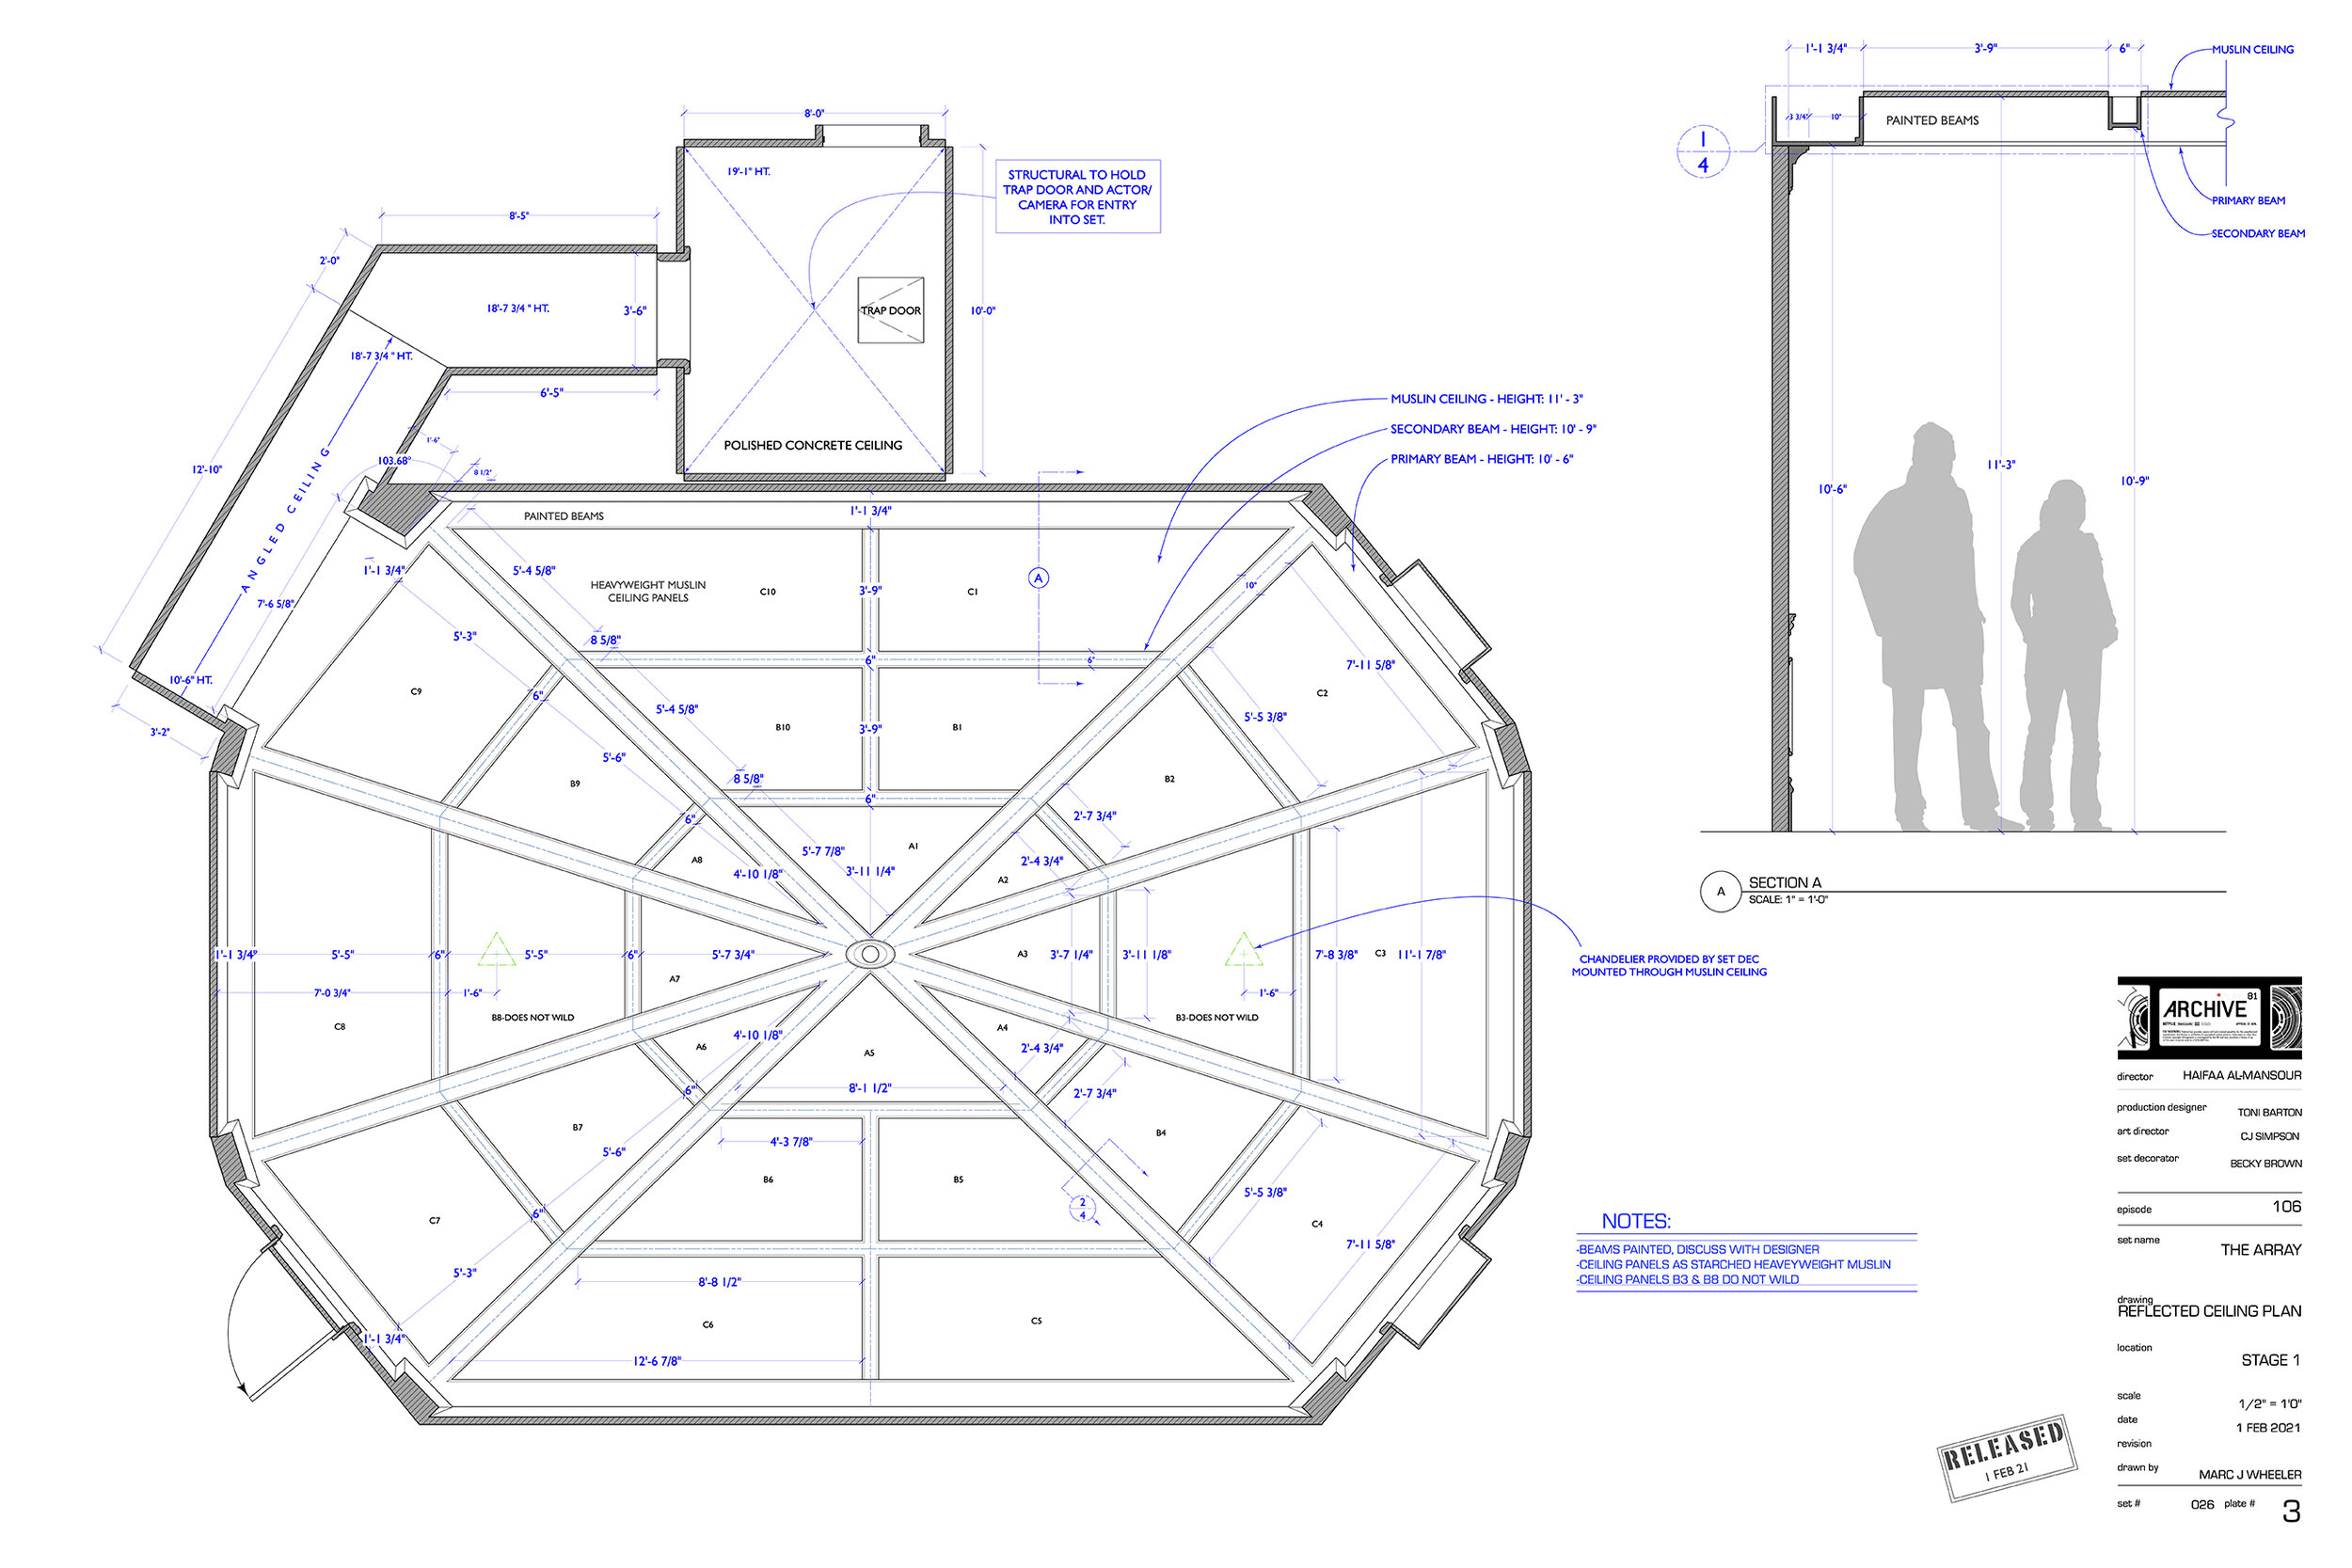 A81 106-026-3 REFLECTED CEILING PLAN copy.jpg